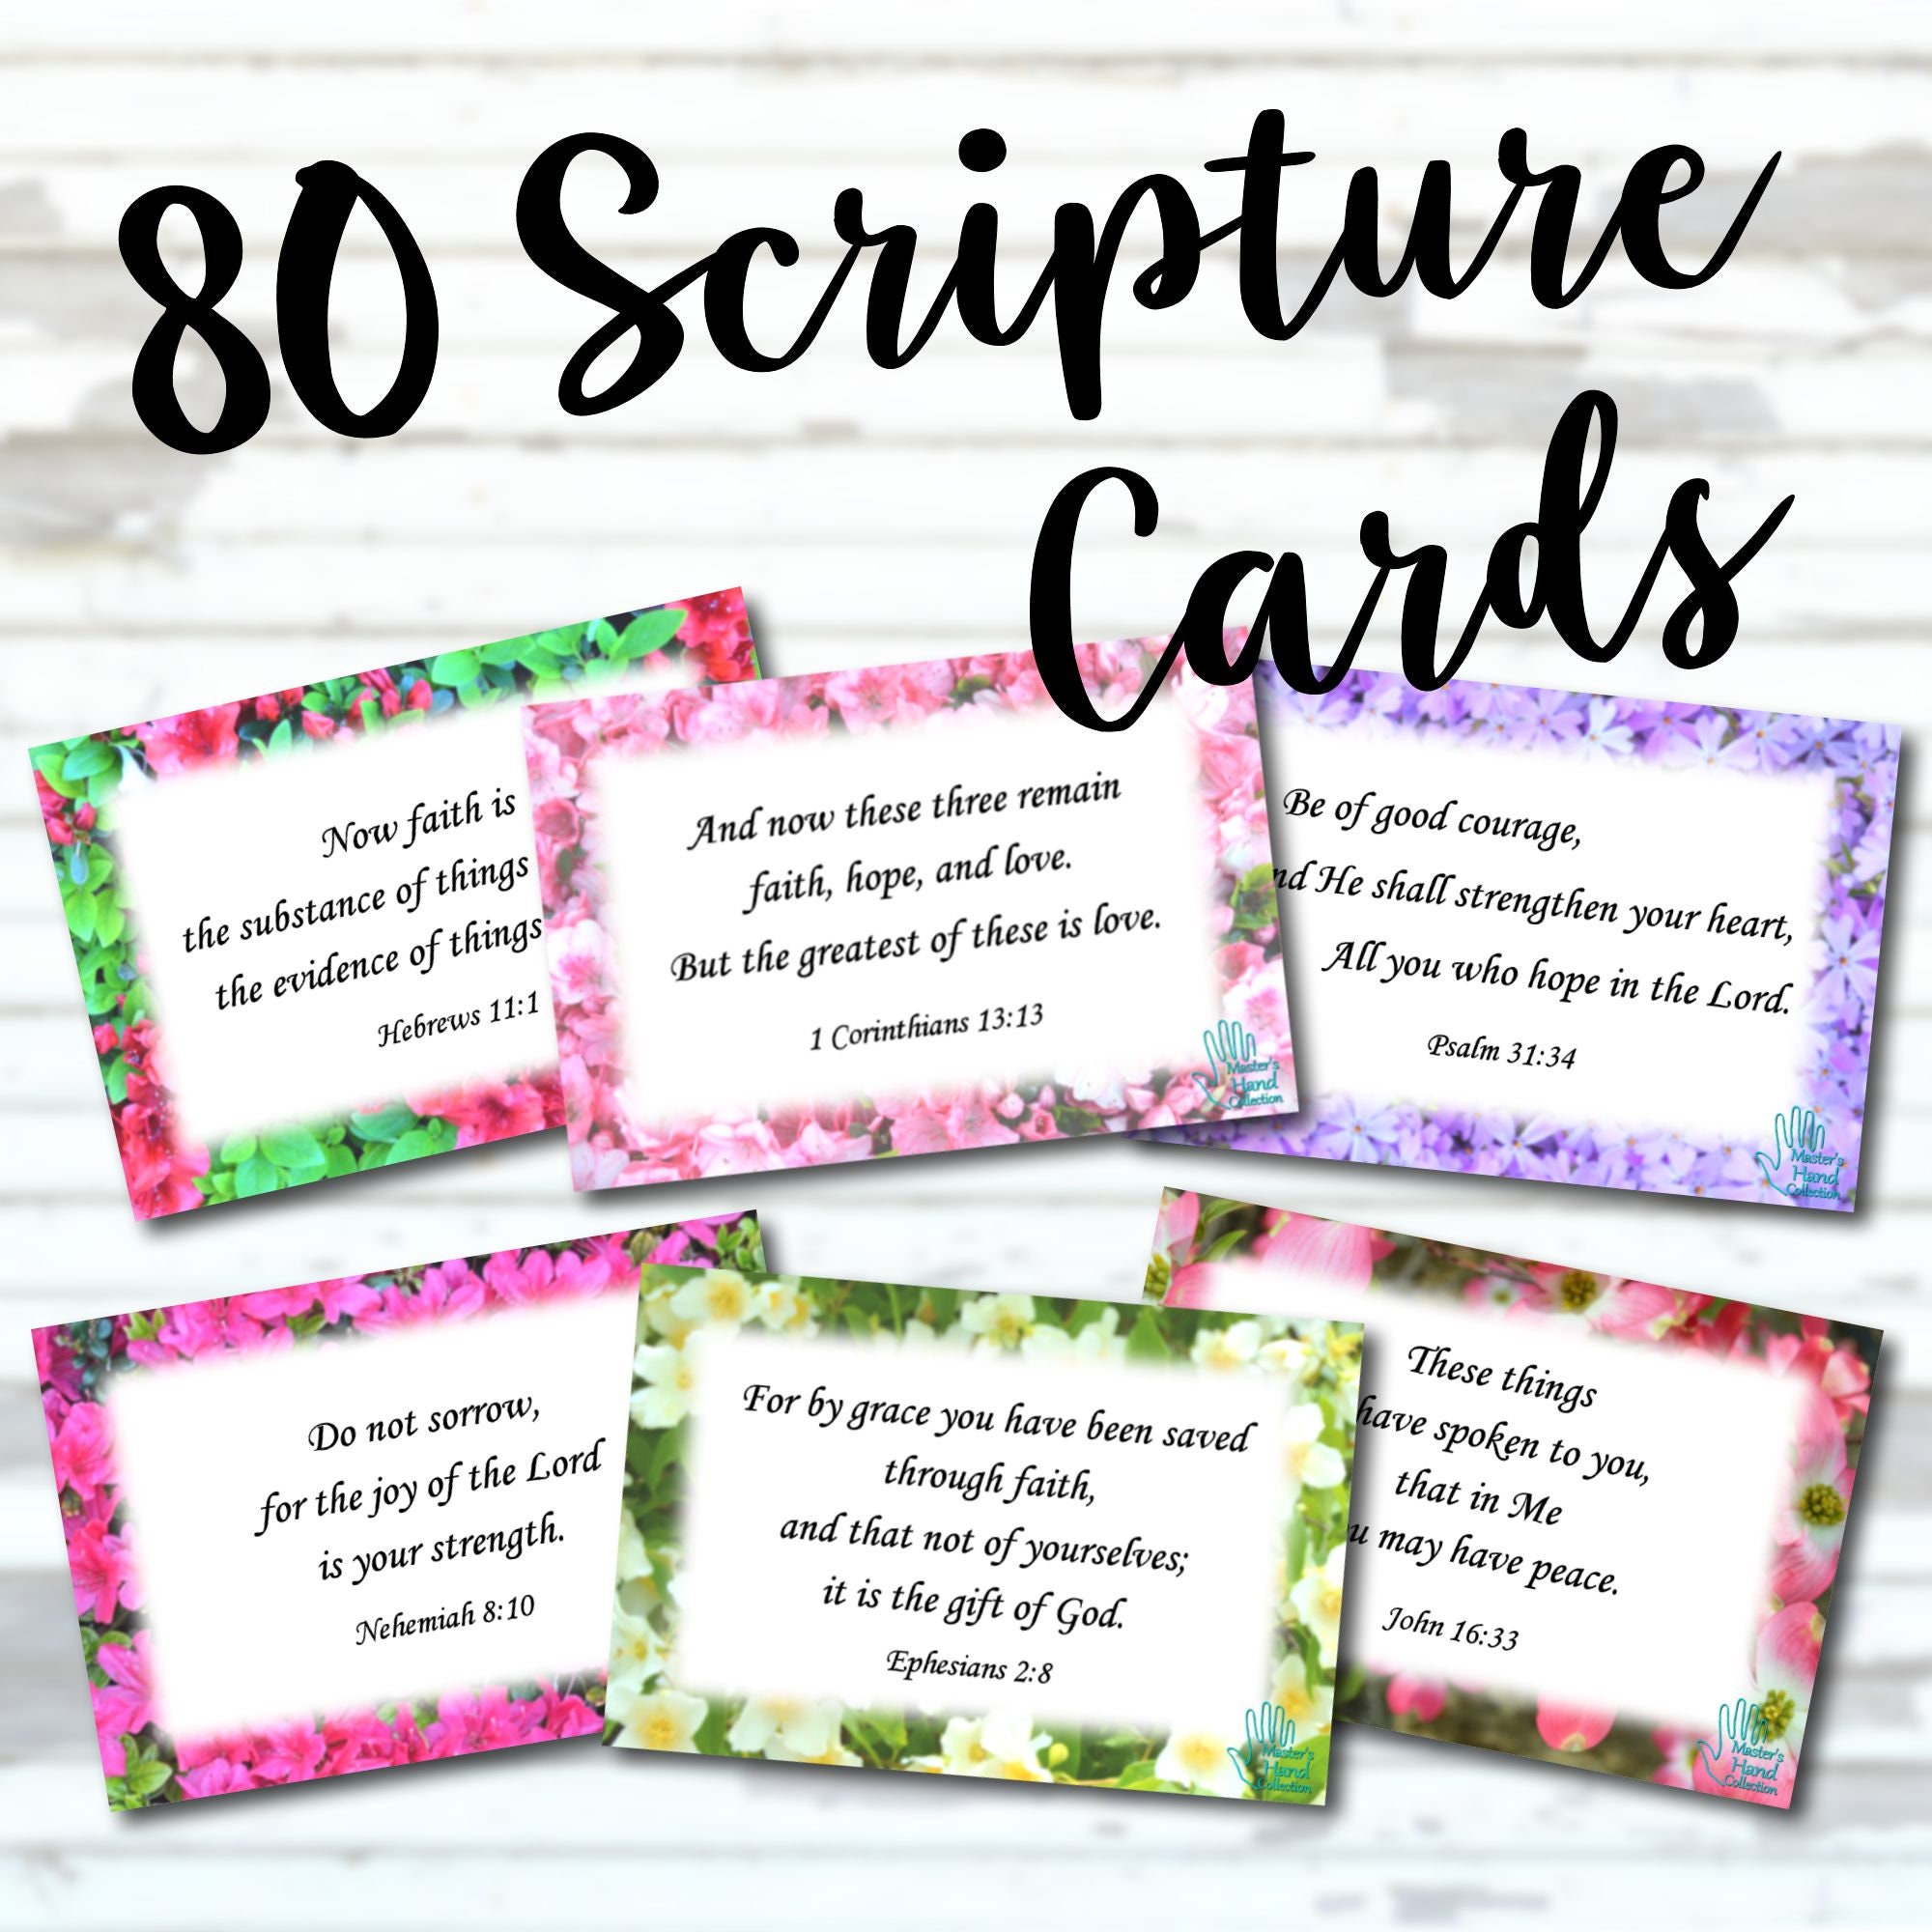 Foundation Verses Mini Scripture Cards - Bored and Busy Mama